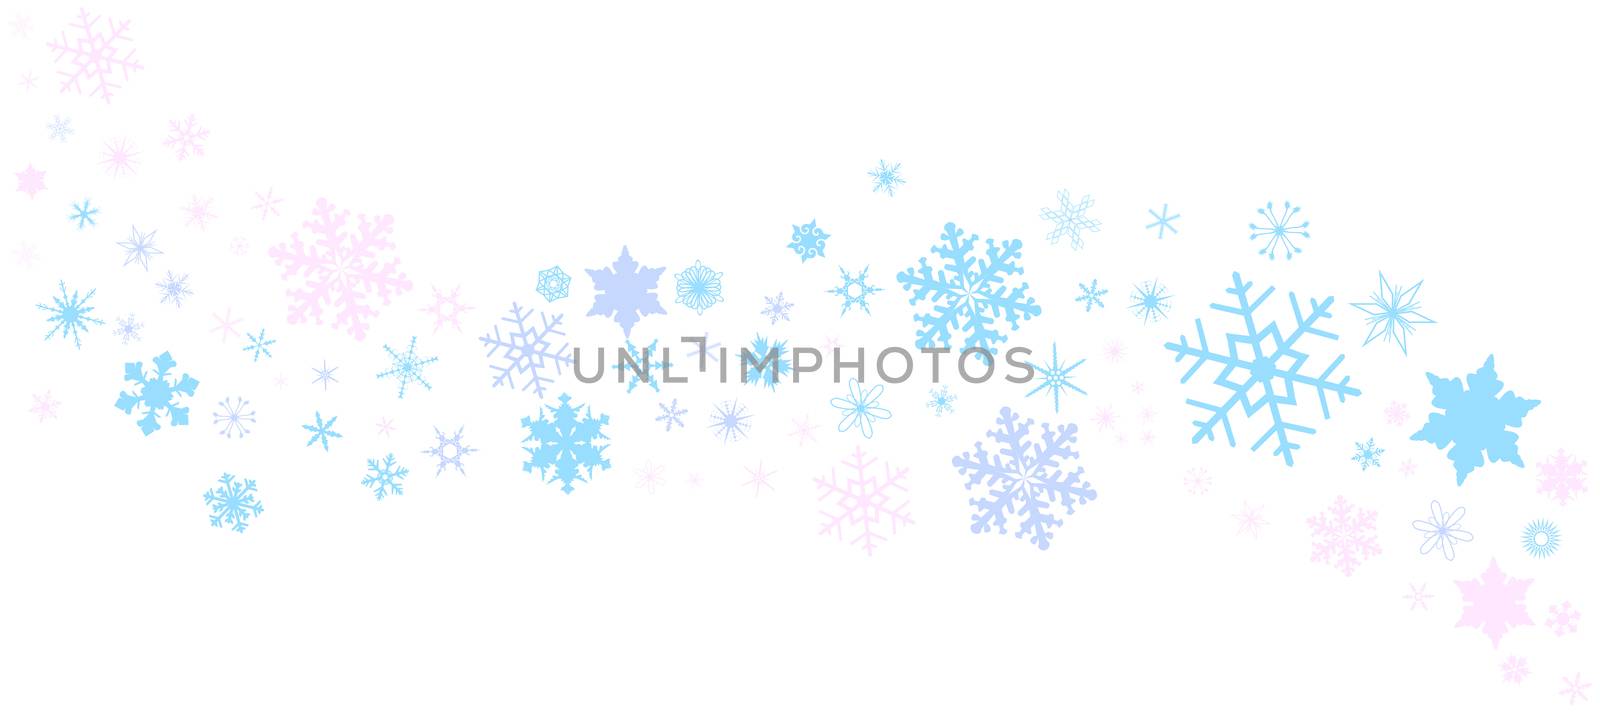 A banner of snowflakes in pastel over a white background